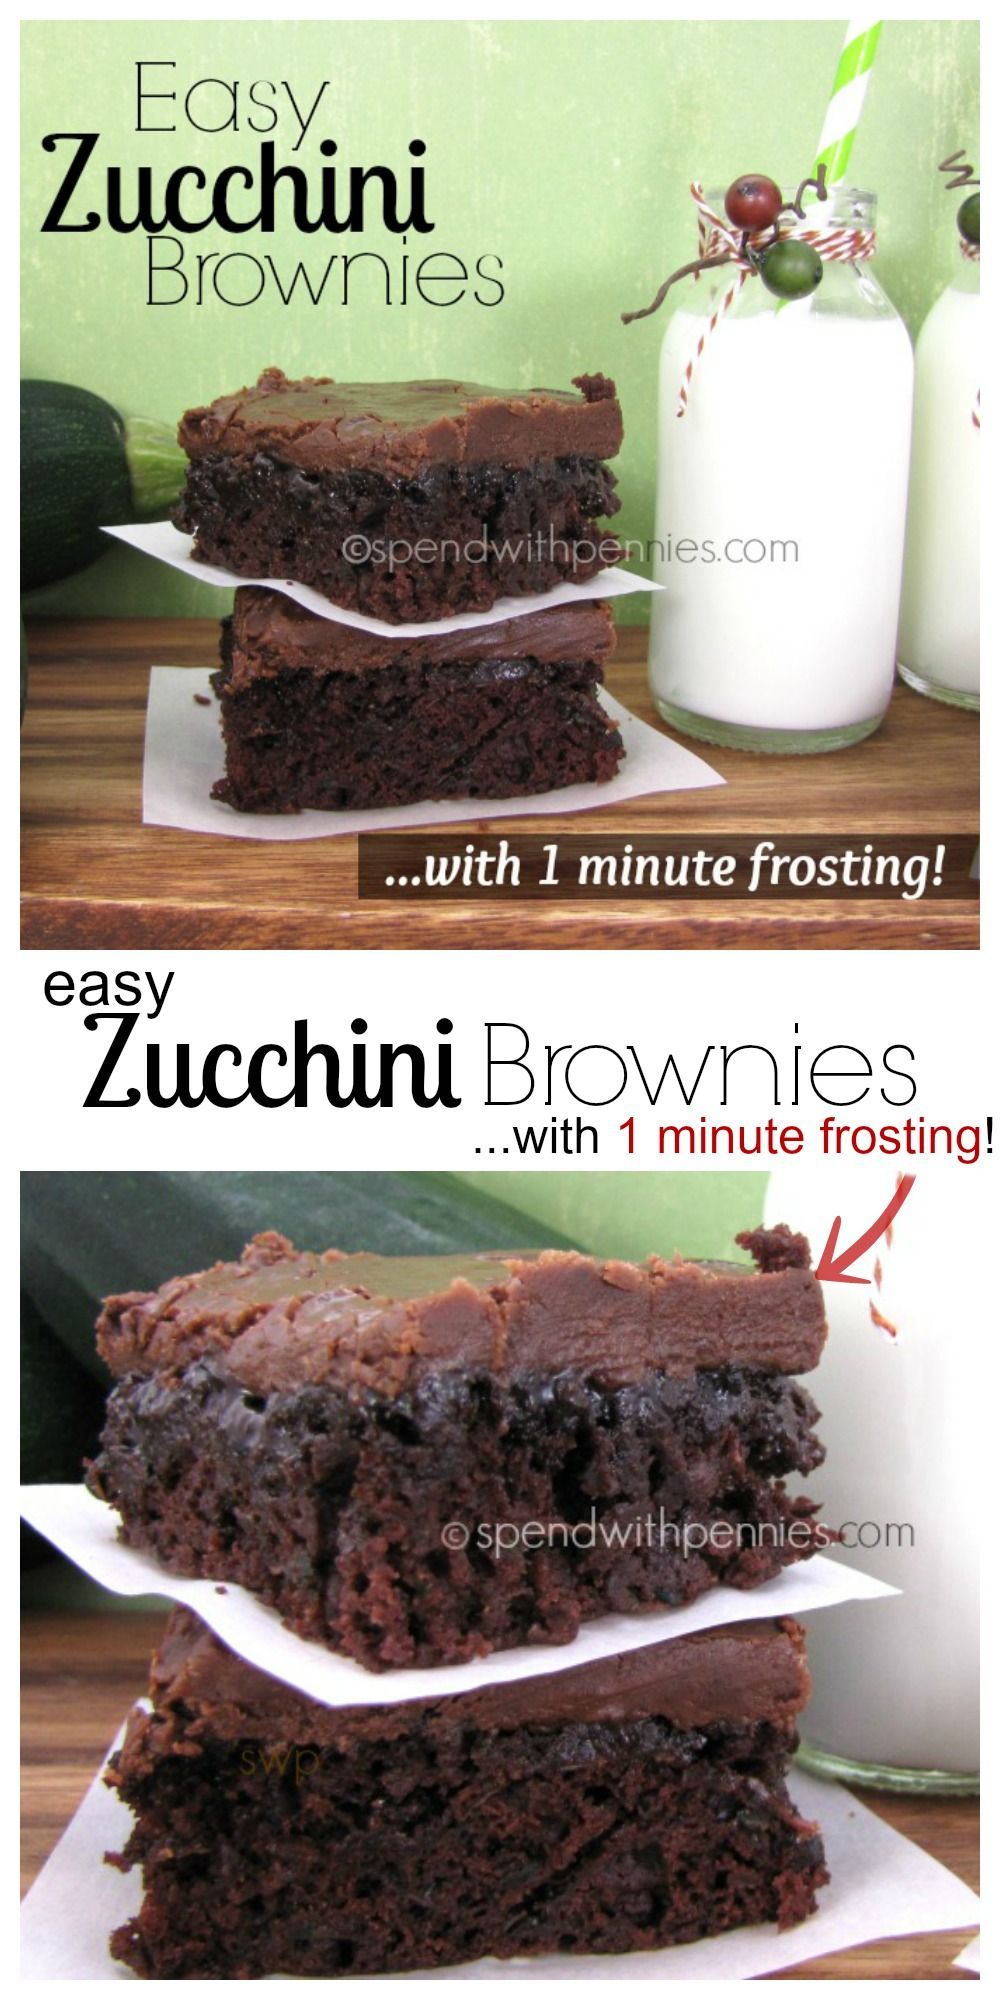 Zucchini Brownies with 1 Minute Frosting!Easy Zucchini Brownies with 1 minute Frosting!  These are quick and amazing to make…